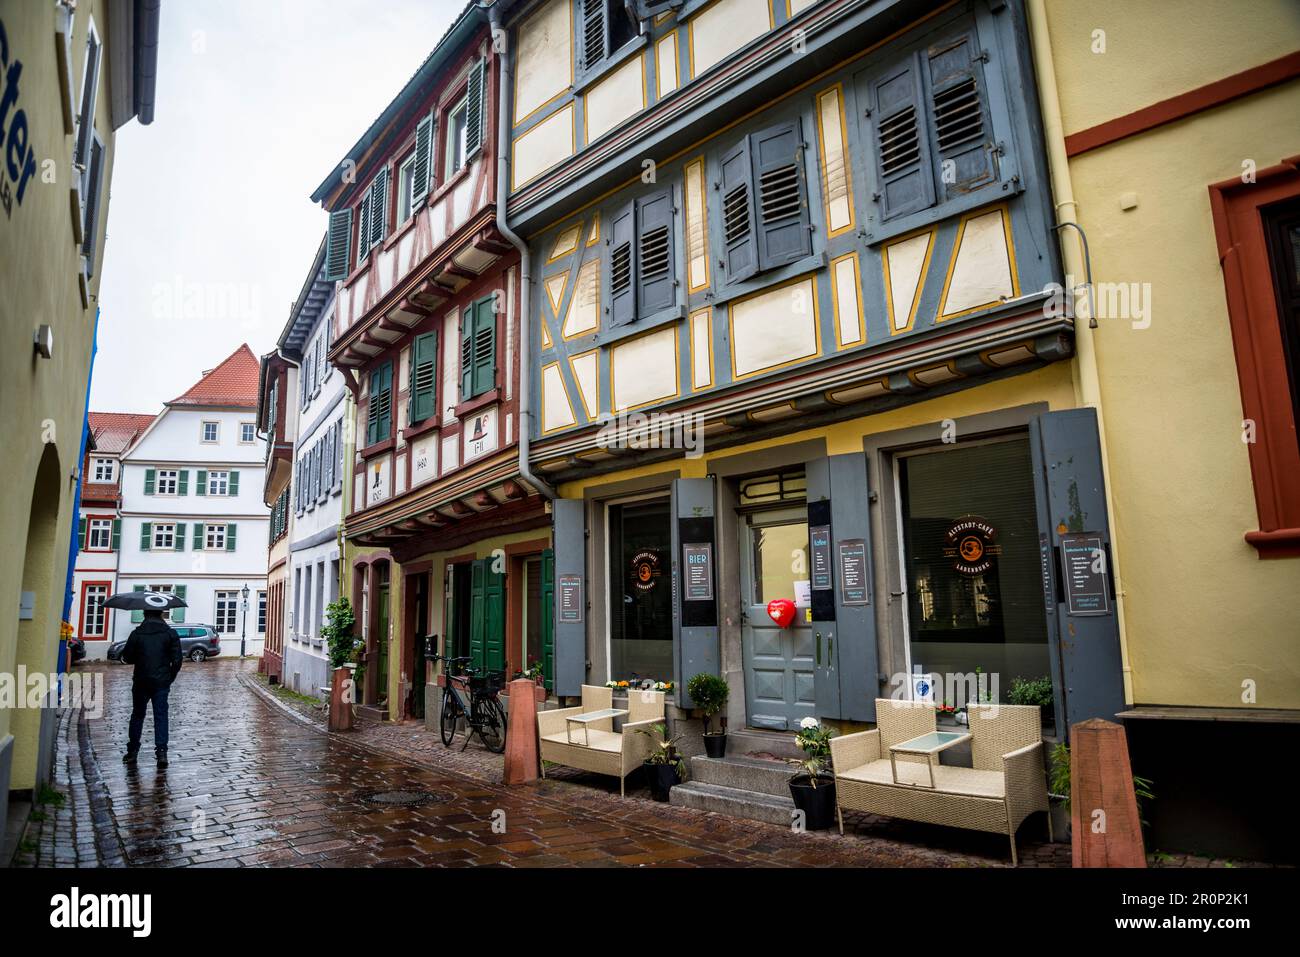 Street with the old traditional medieval architecture with exposed beams, Ladenburg, Baden-Württemberg, Germany Stock Photo